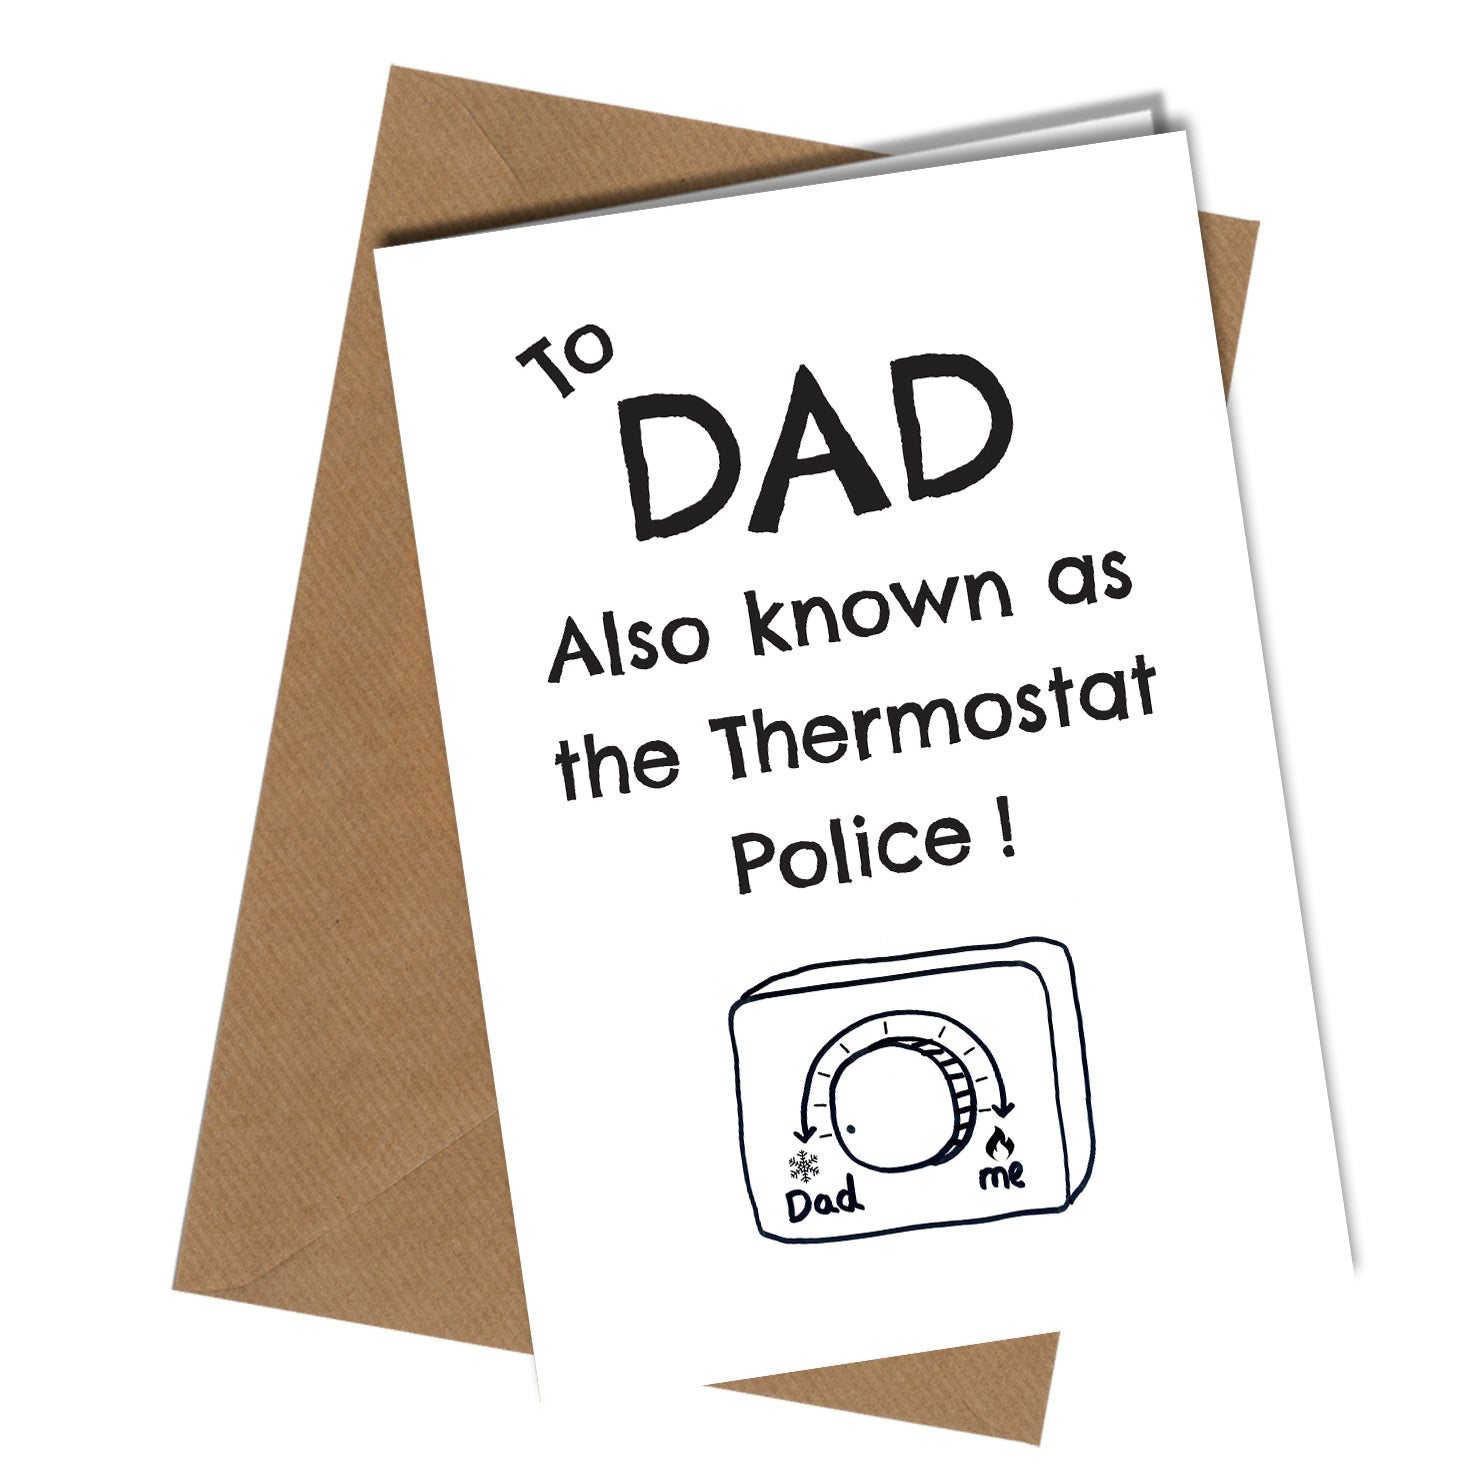 #445 Thermostat Police